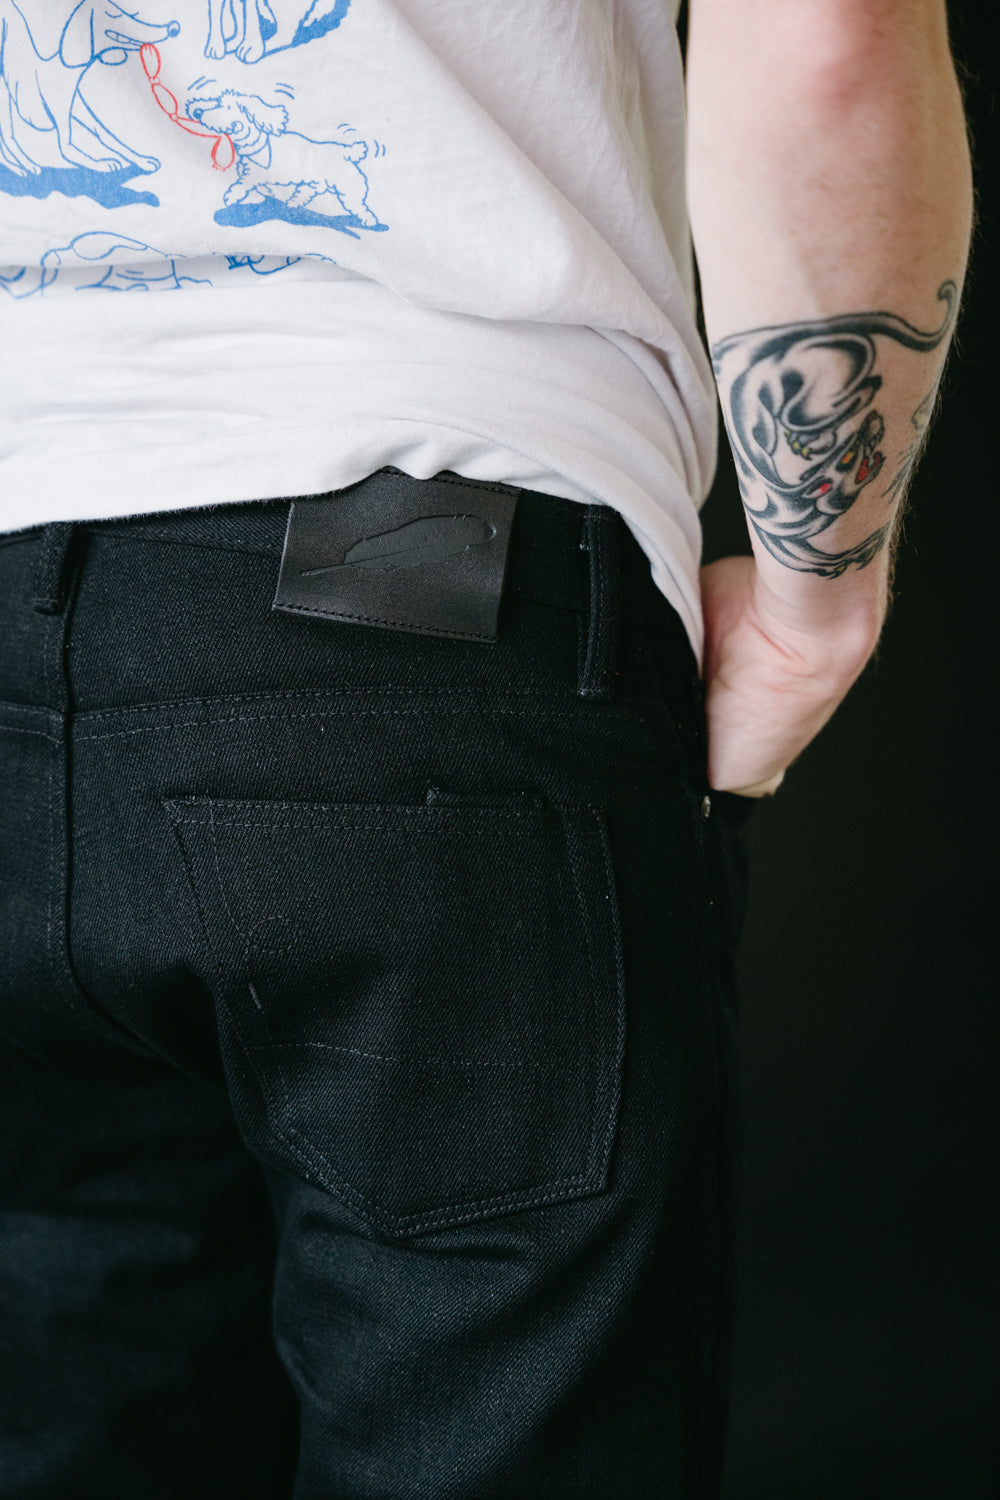 17oz - Cryptic Stealth Selvedge - Silveridge Fit